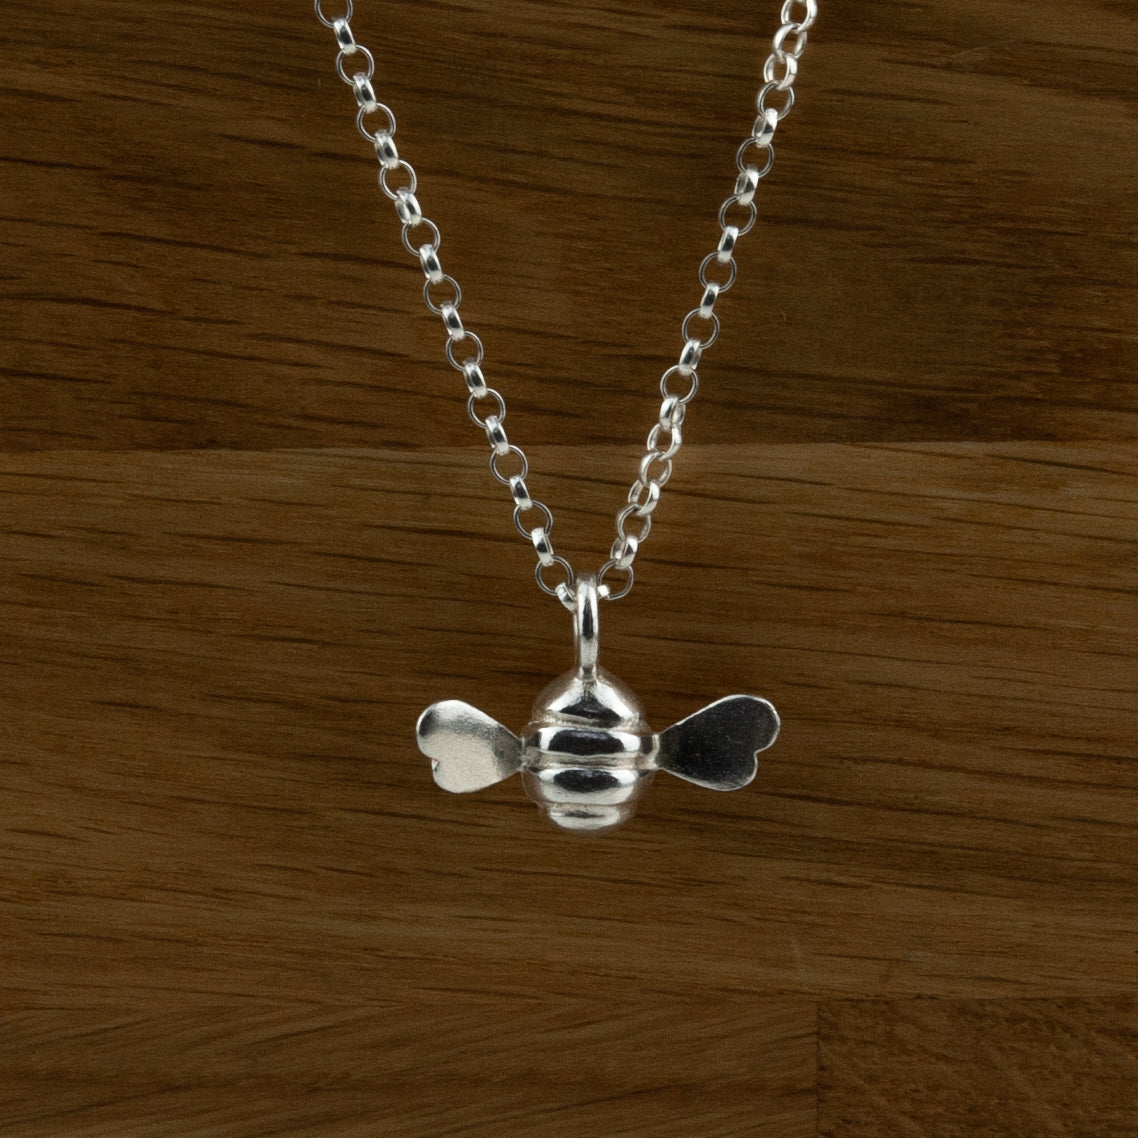 Belle & Bee sterling silver bee necklace